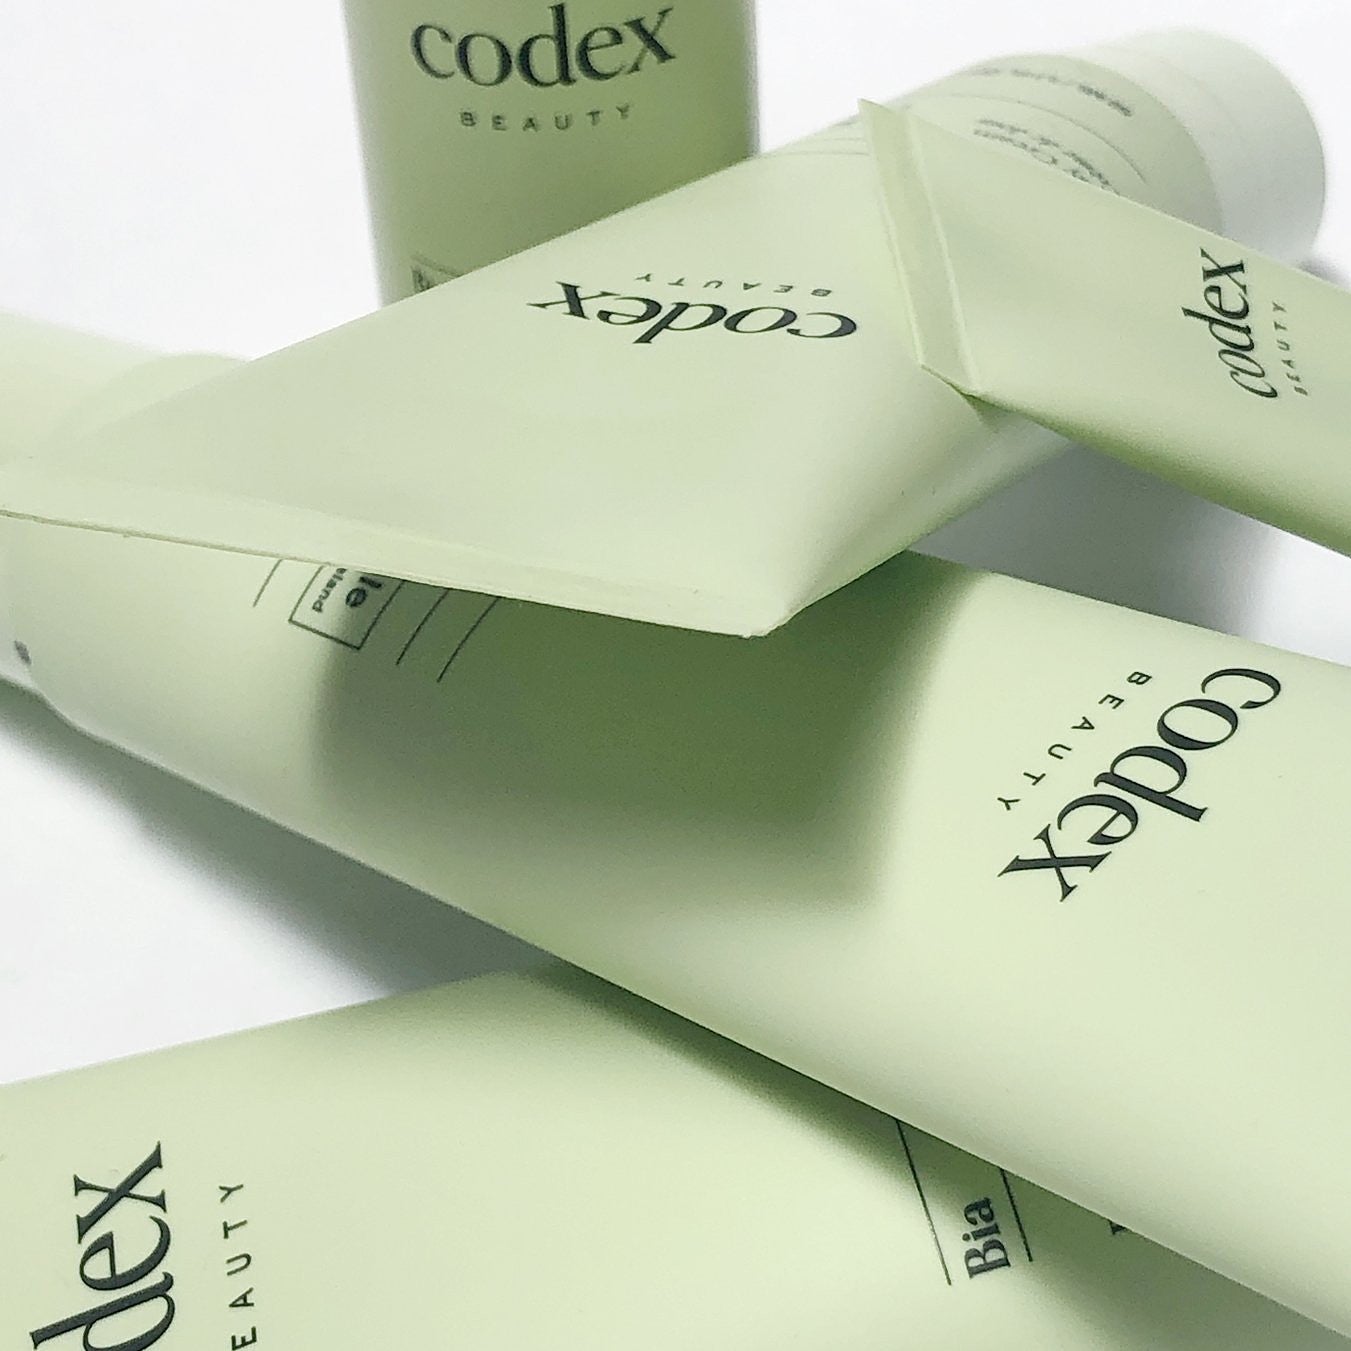 Beauty Brands Giving Back To Those Affected By The COVID-19 Pandemic